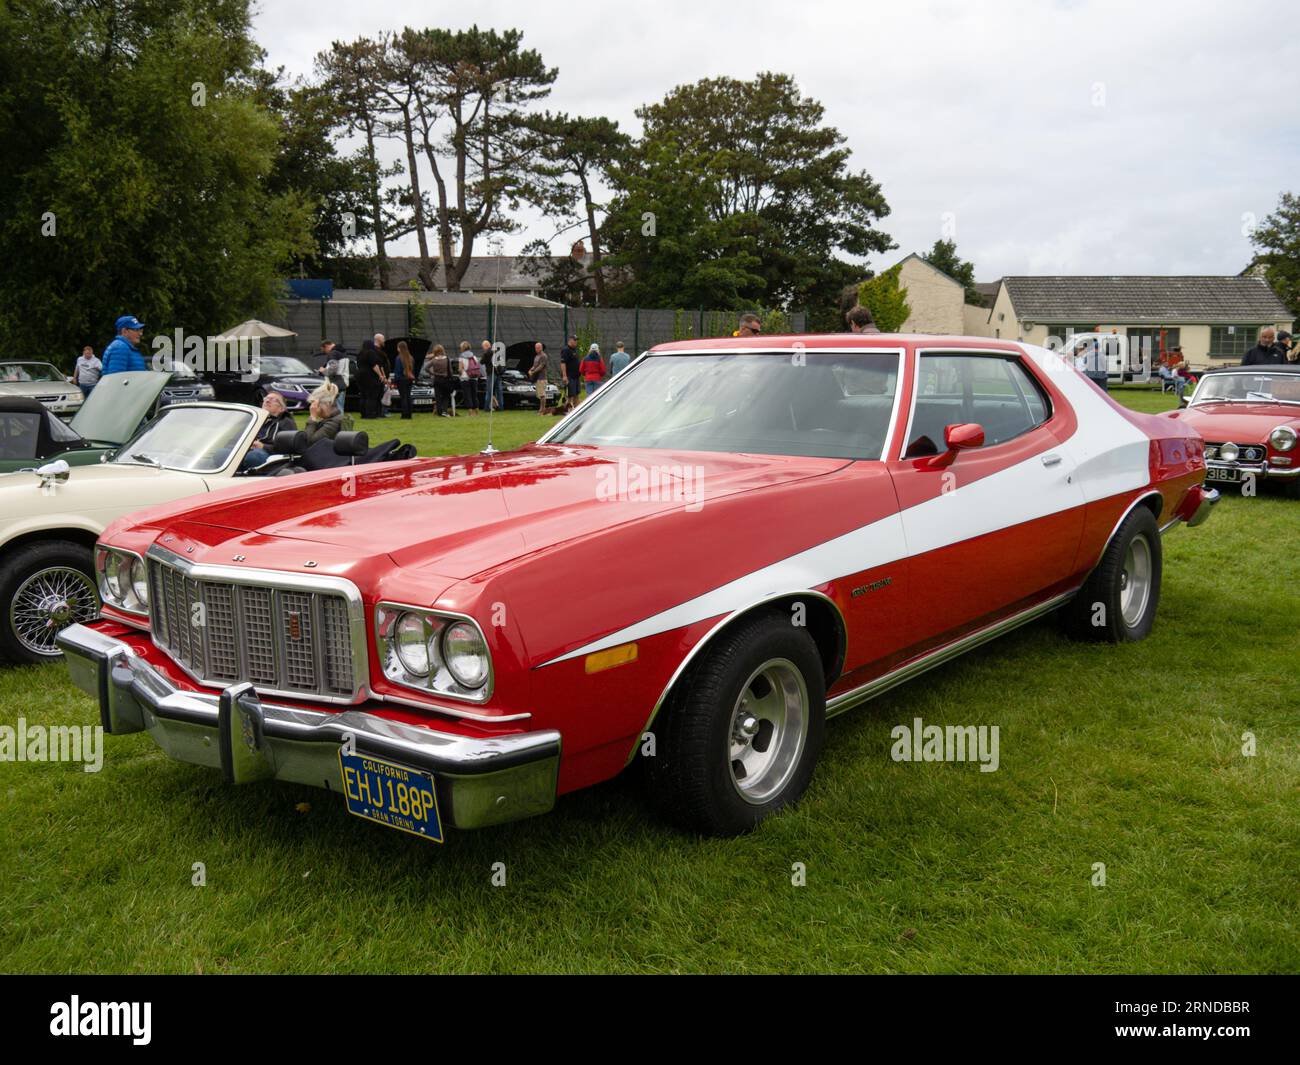 Starsky and hutch car editorial stock photo. Image of display